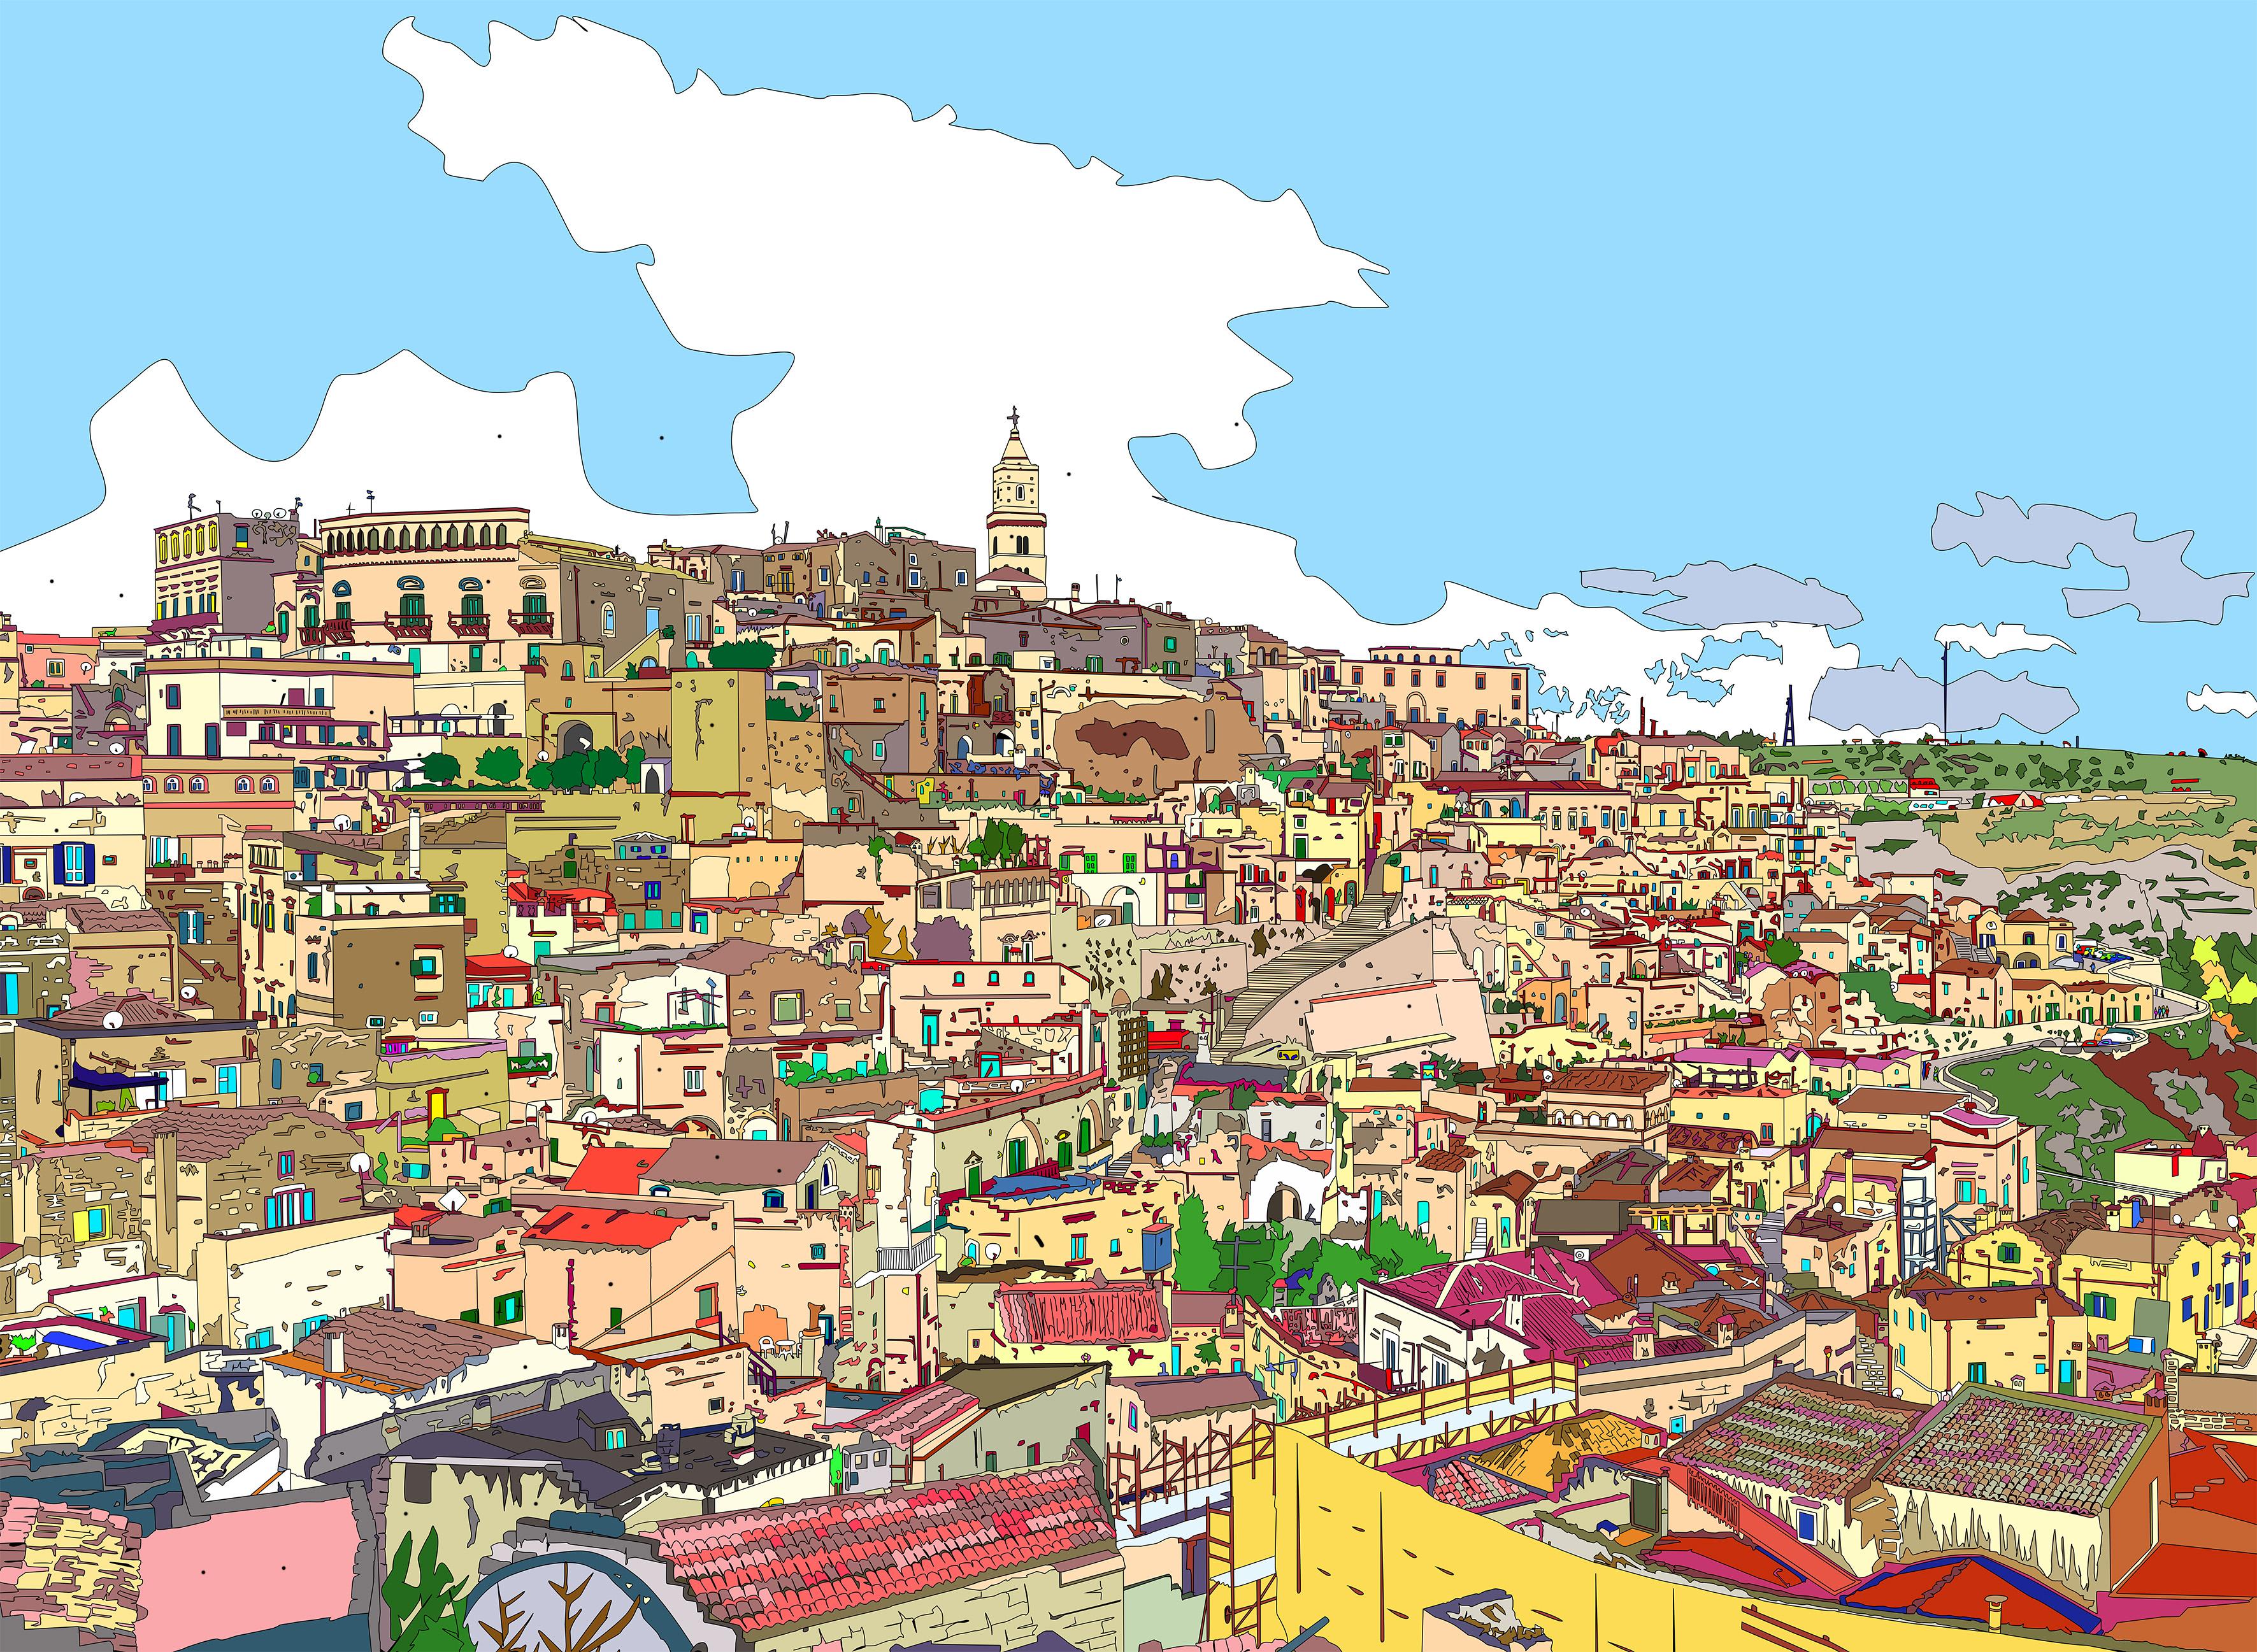 Digital art printed on canvas, original edition 1/1

''This is a town in Basilicata, next to region where I was born Calabria, the place doesn't need much of explanations. Its medieval tracts are very clear and the view is breathtaking.''

Marco